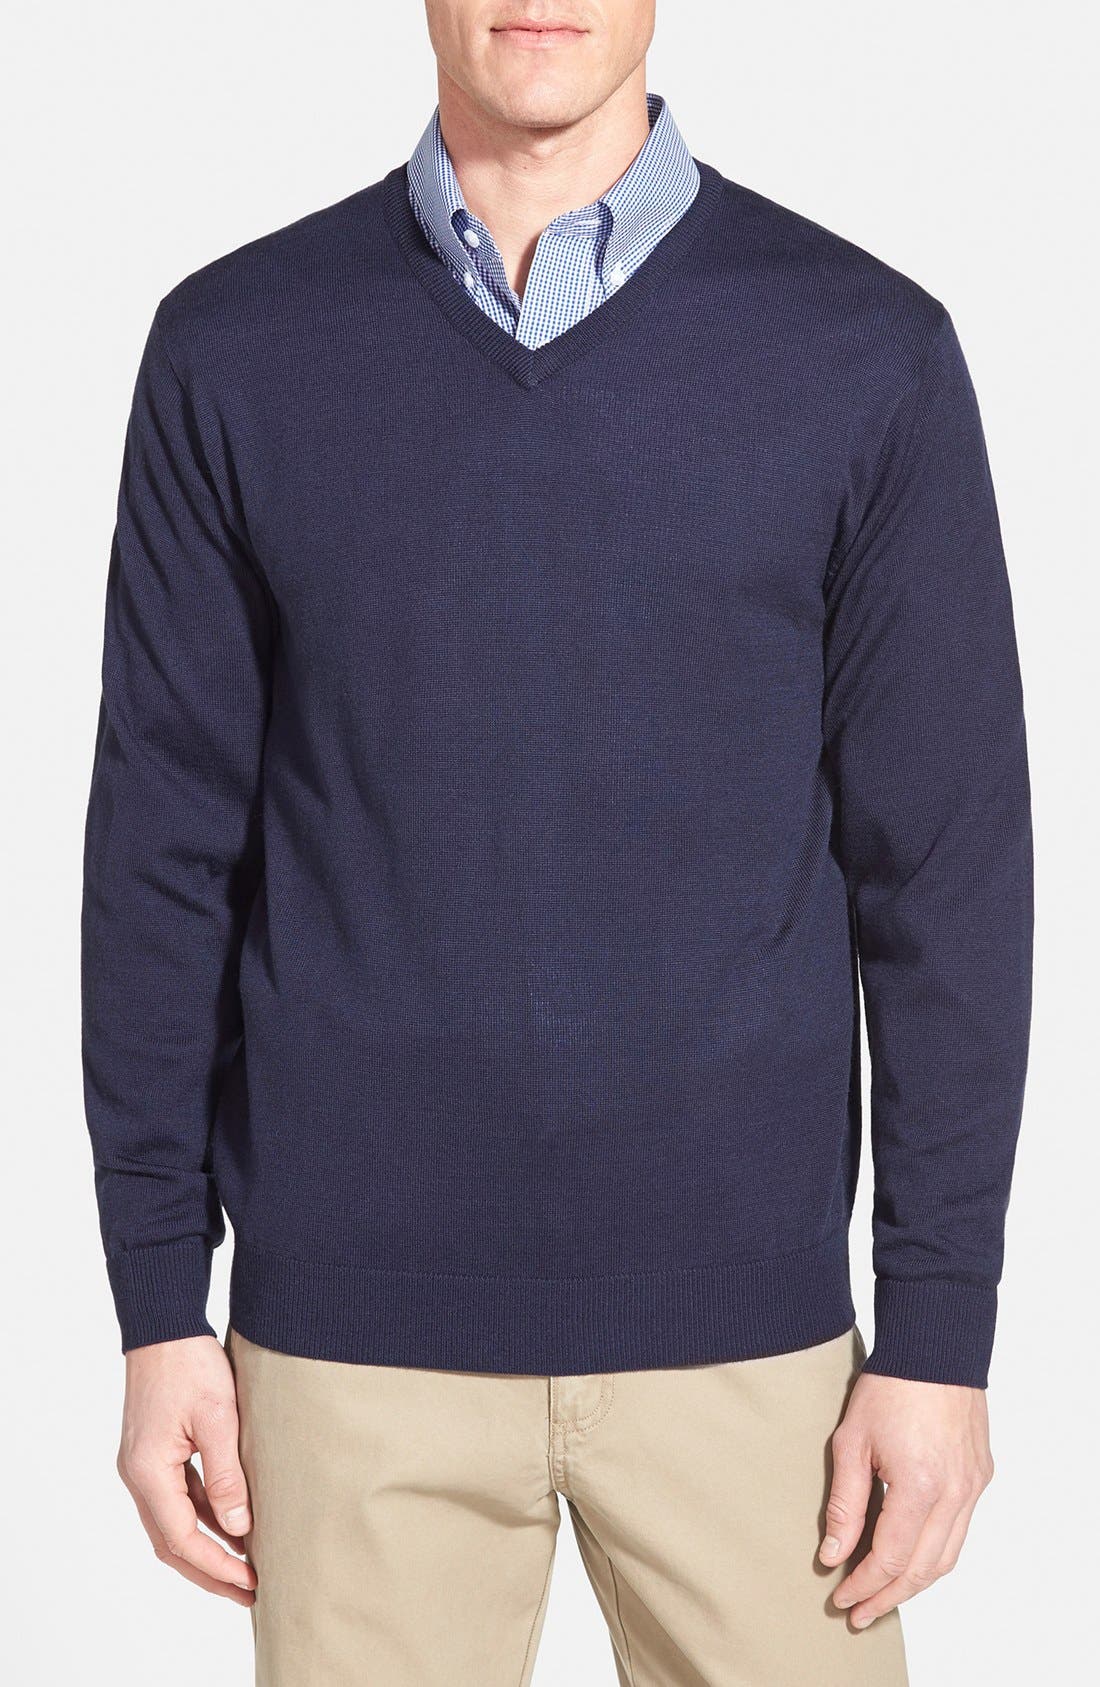 collared shirt with v neck sweater